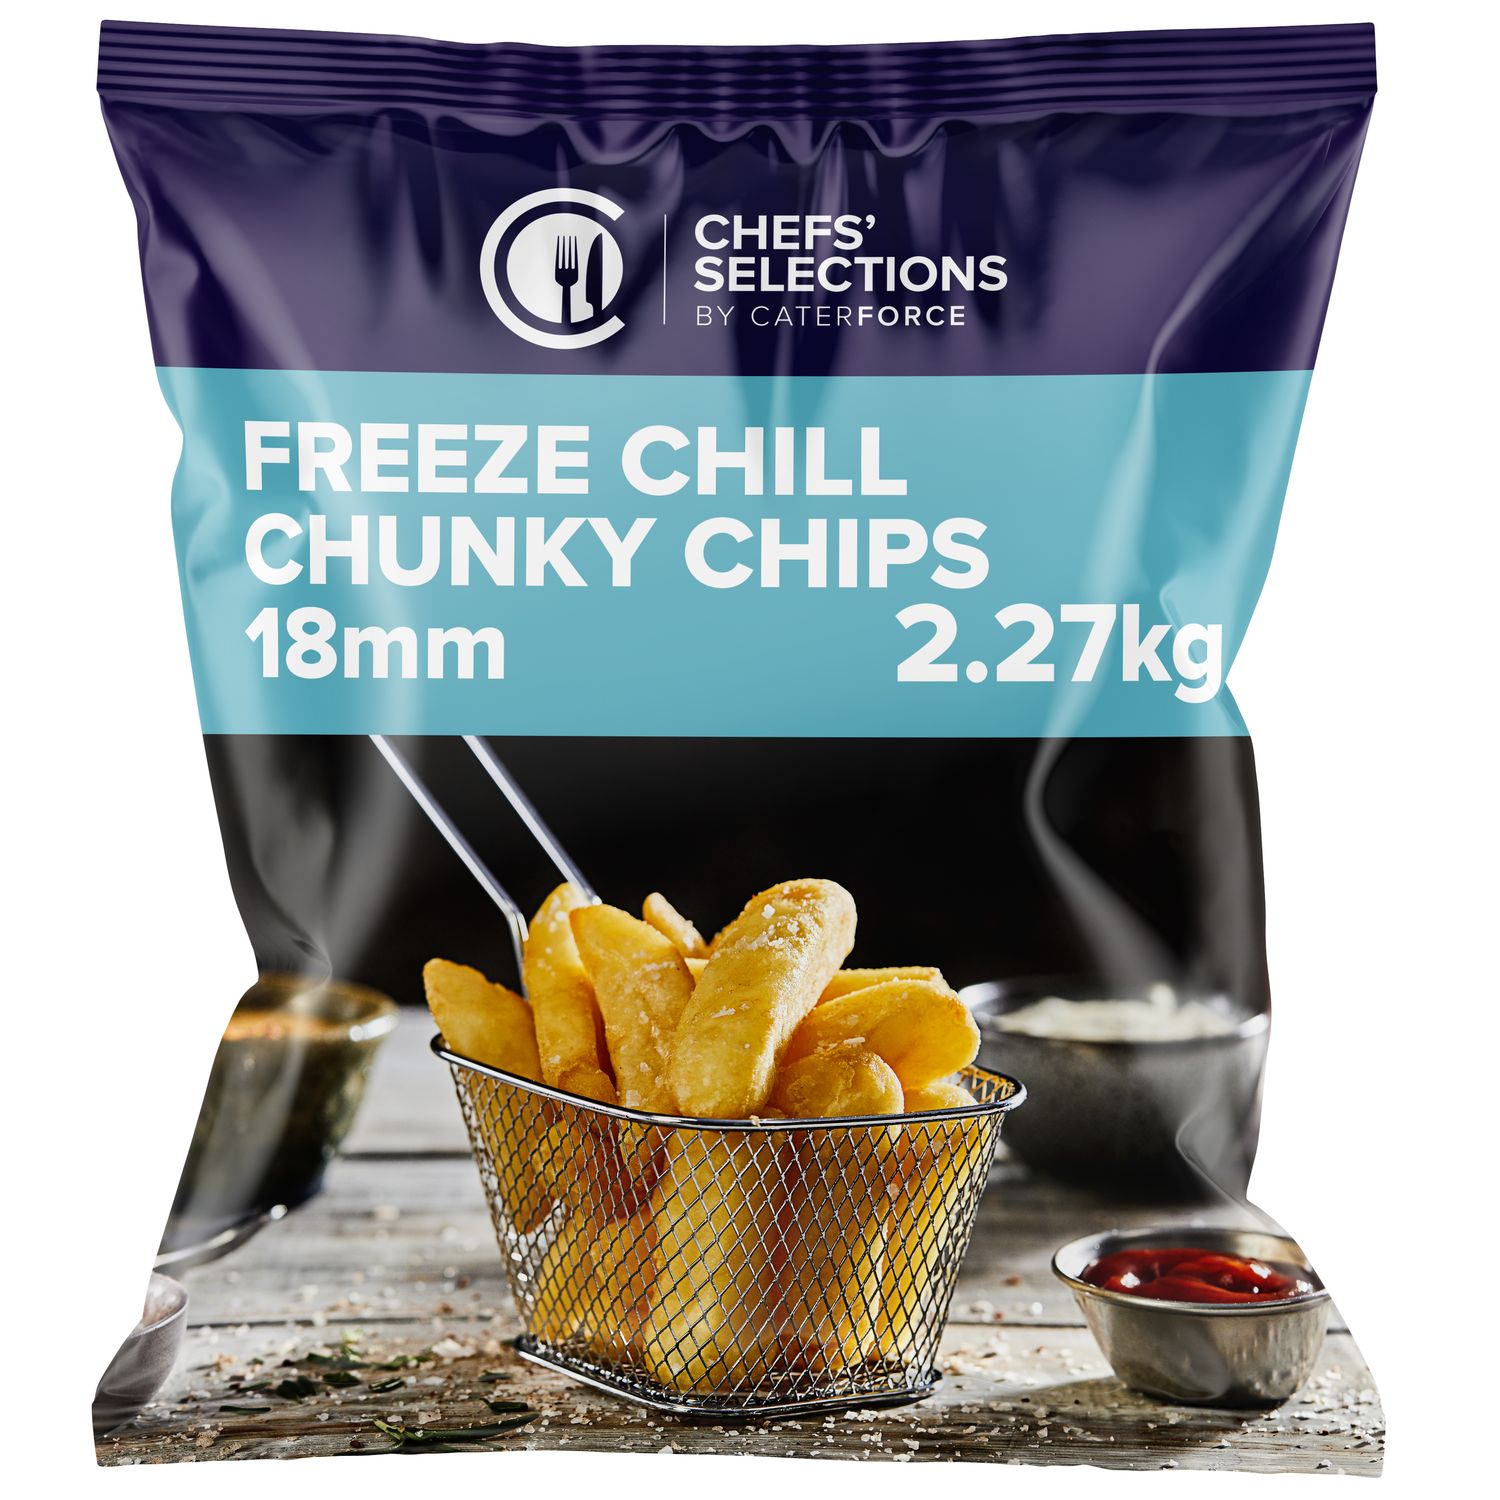 Chefs’ Selections Freeze Chill Chunky 18mm Fries (4 x 2.27kg)